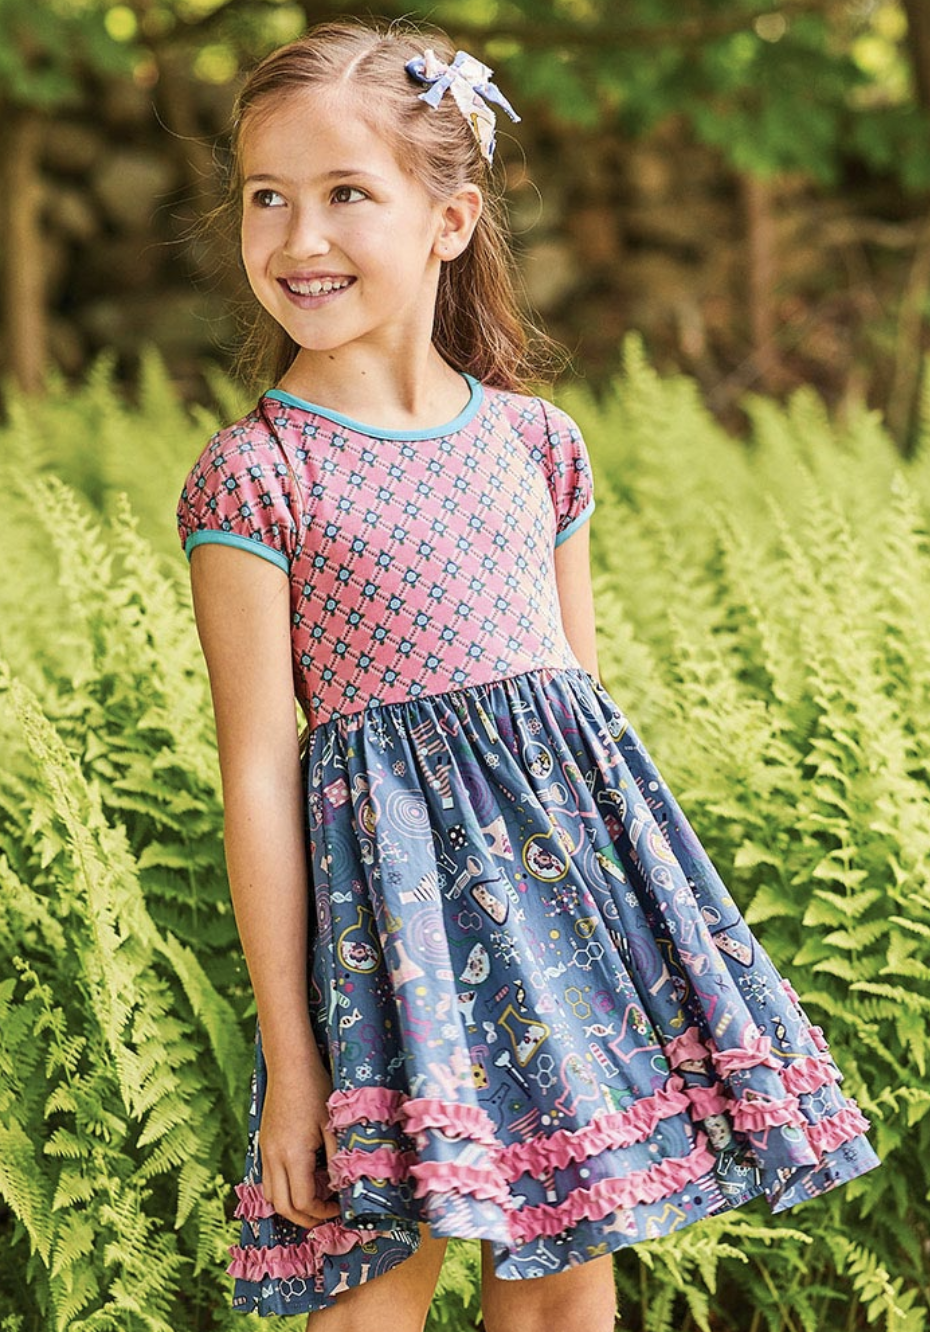 Details about   NWT Matilda Jane Girls size 12 Picking Flowers Dress Choose Your Path Fall 2018 